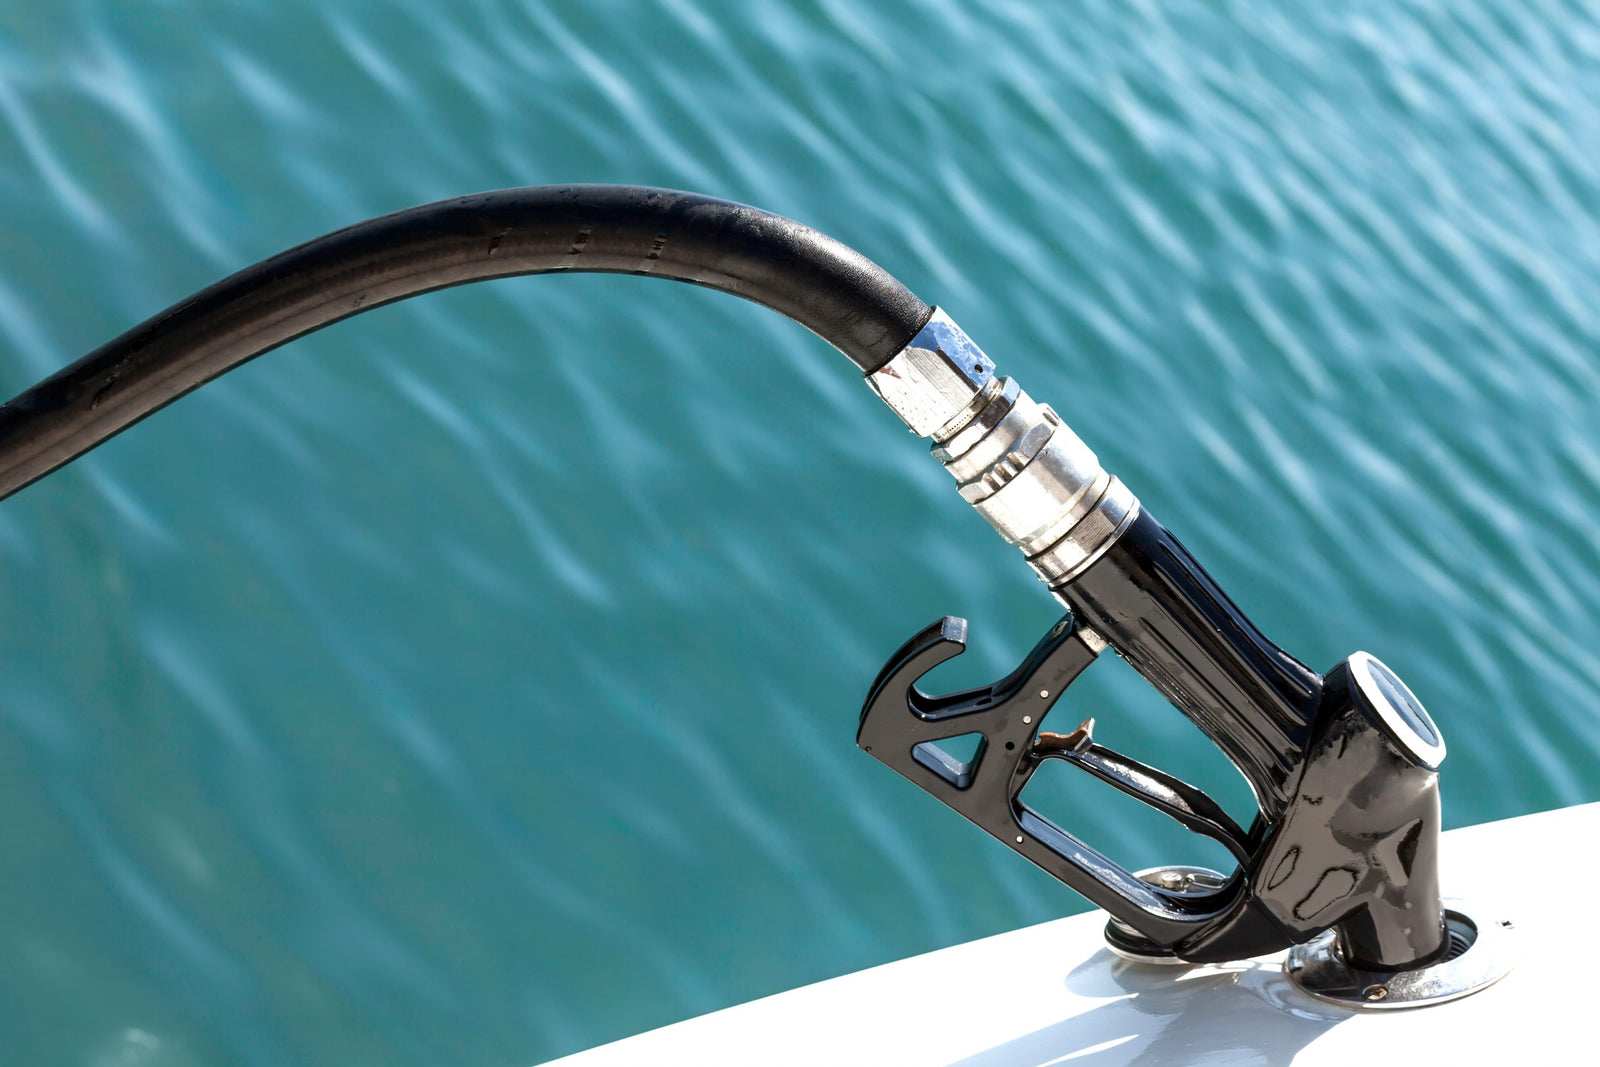 What Are Good Safety Precautions When Fueling Your Boat?